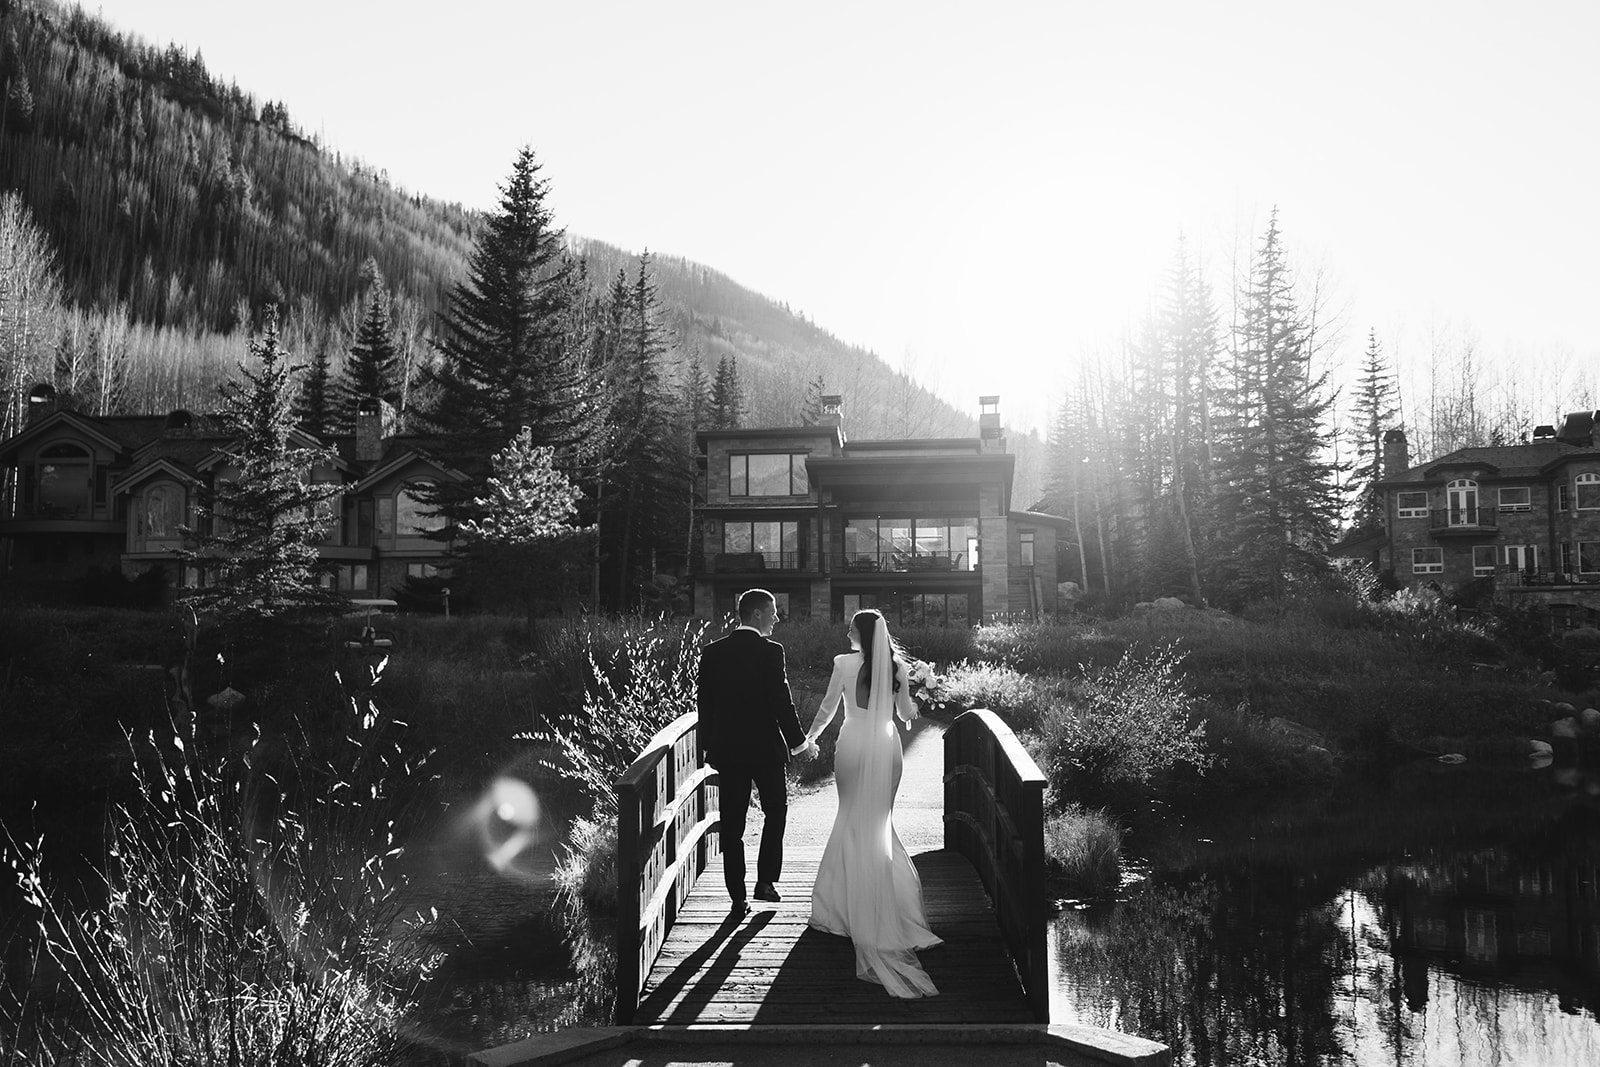 A bride and groom just married at Colorado's Vail Golf Club and Nordic Center.